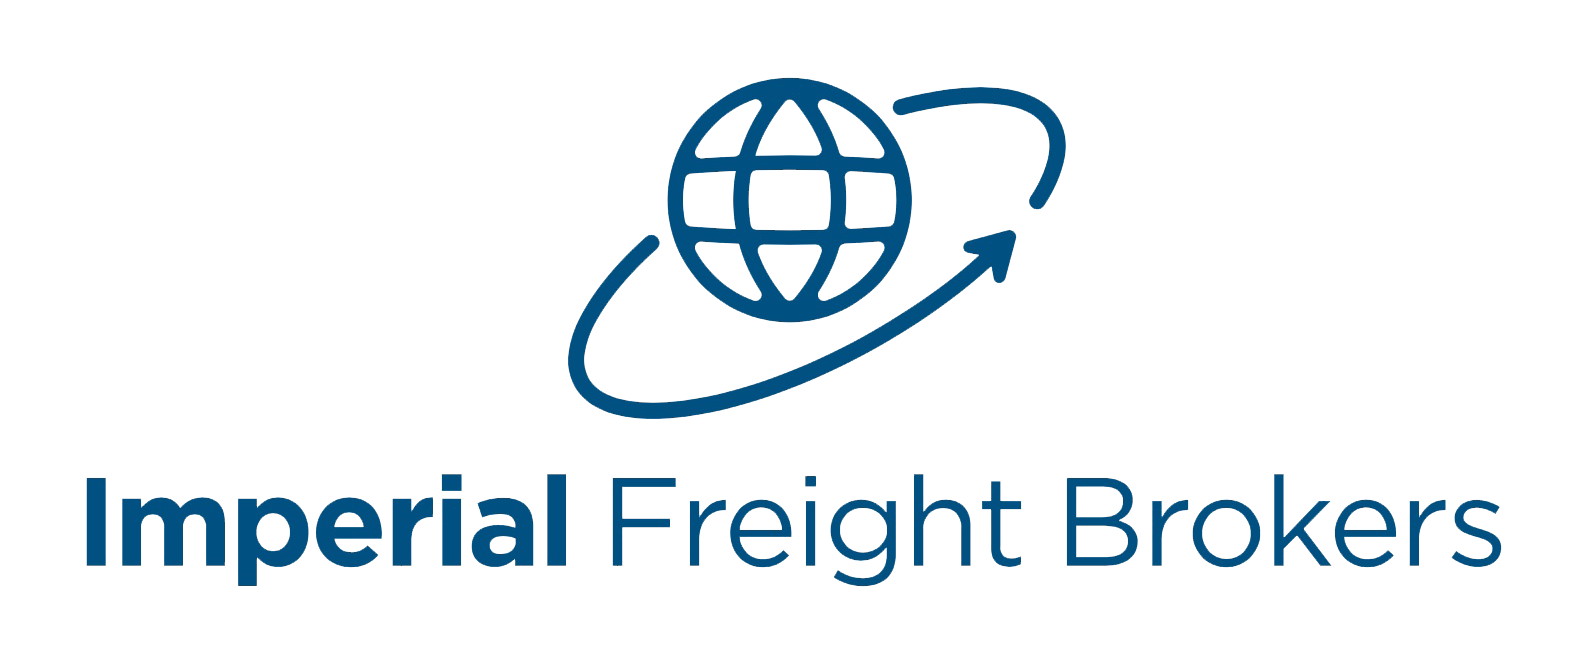 Imperial Freight Logo